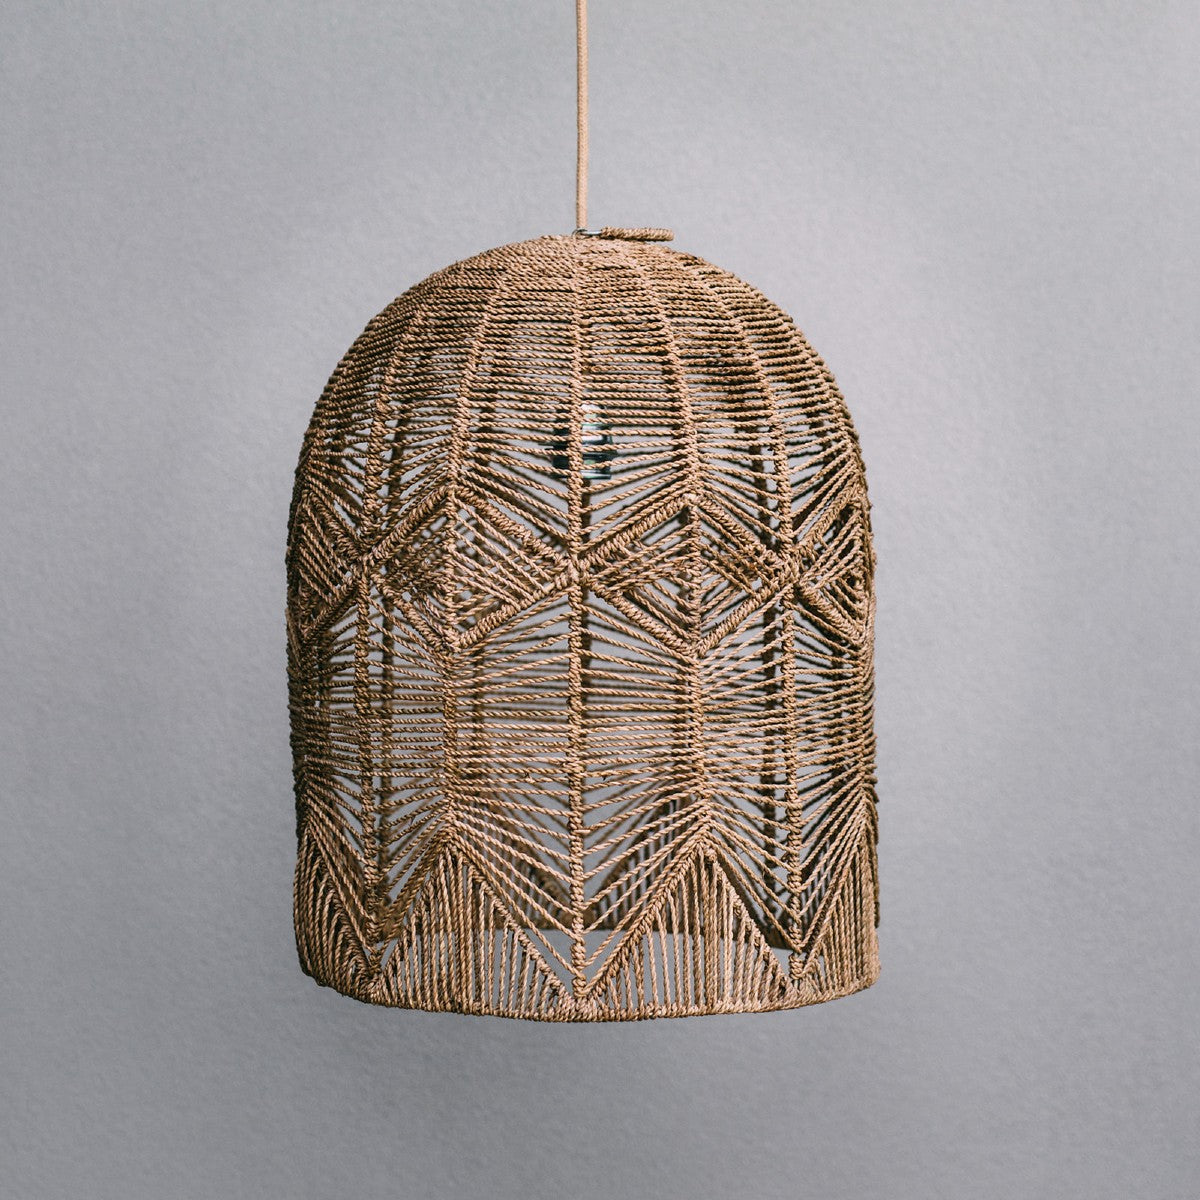 Pendant light seagrass. Product photograph of handmade dome shaped pendant light on a grey background. allows you to see the beautiful pattern in the weave.